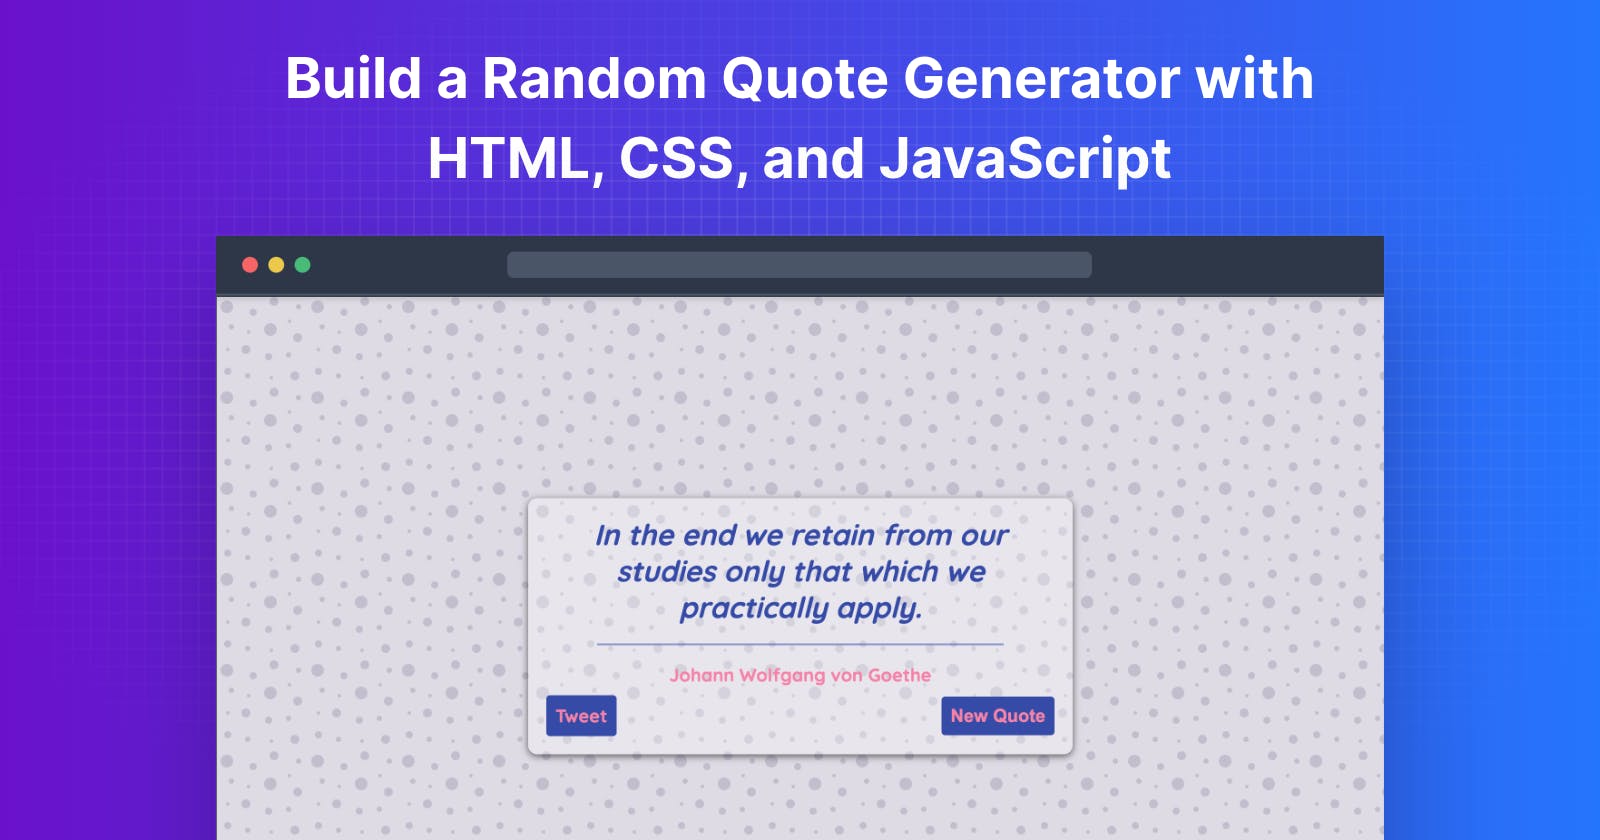 Build a Random Quote Generator with HTML, CSS, and JavaScript